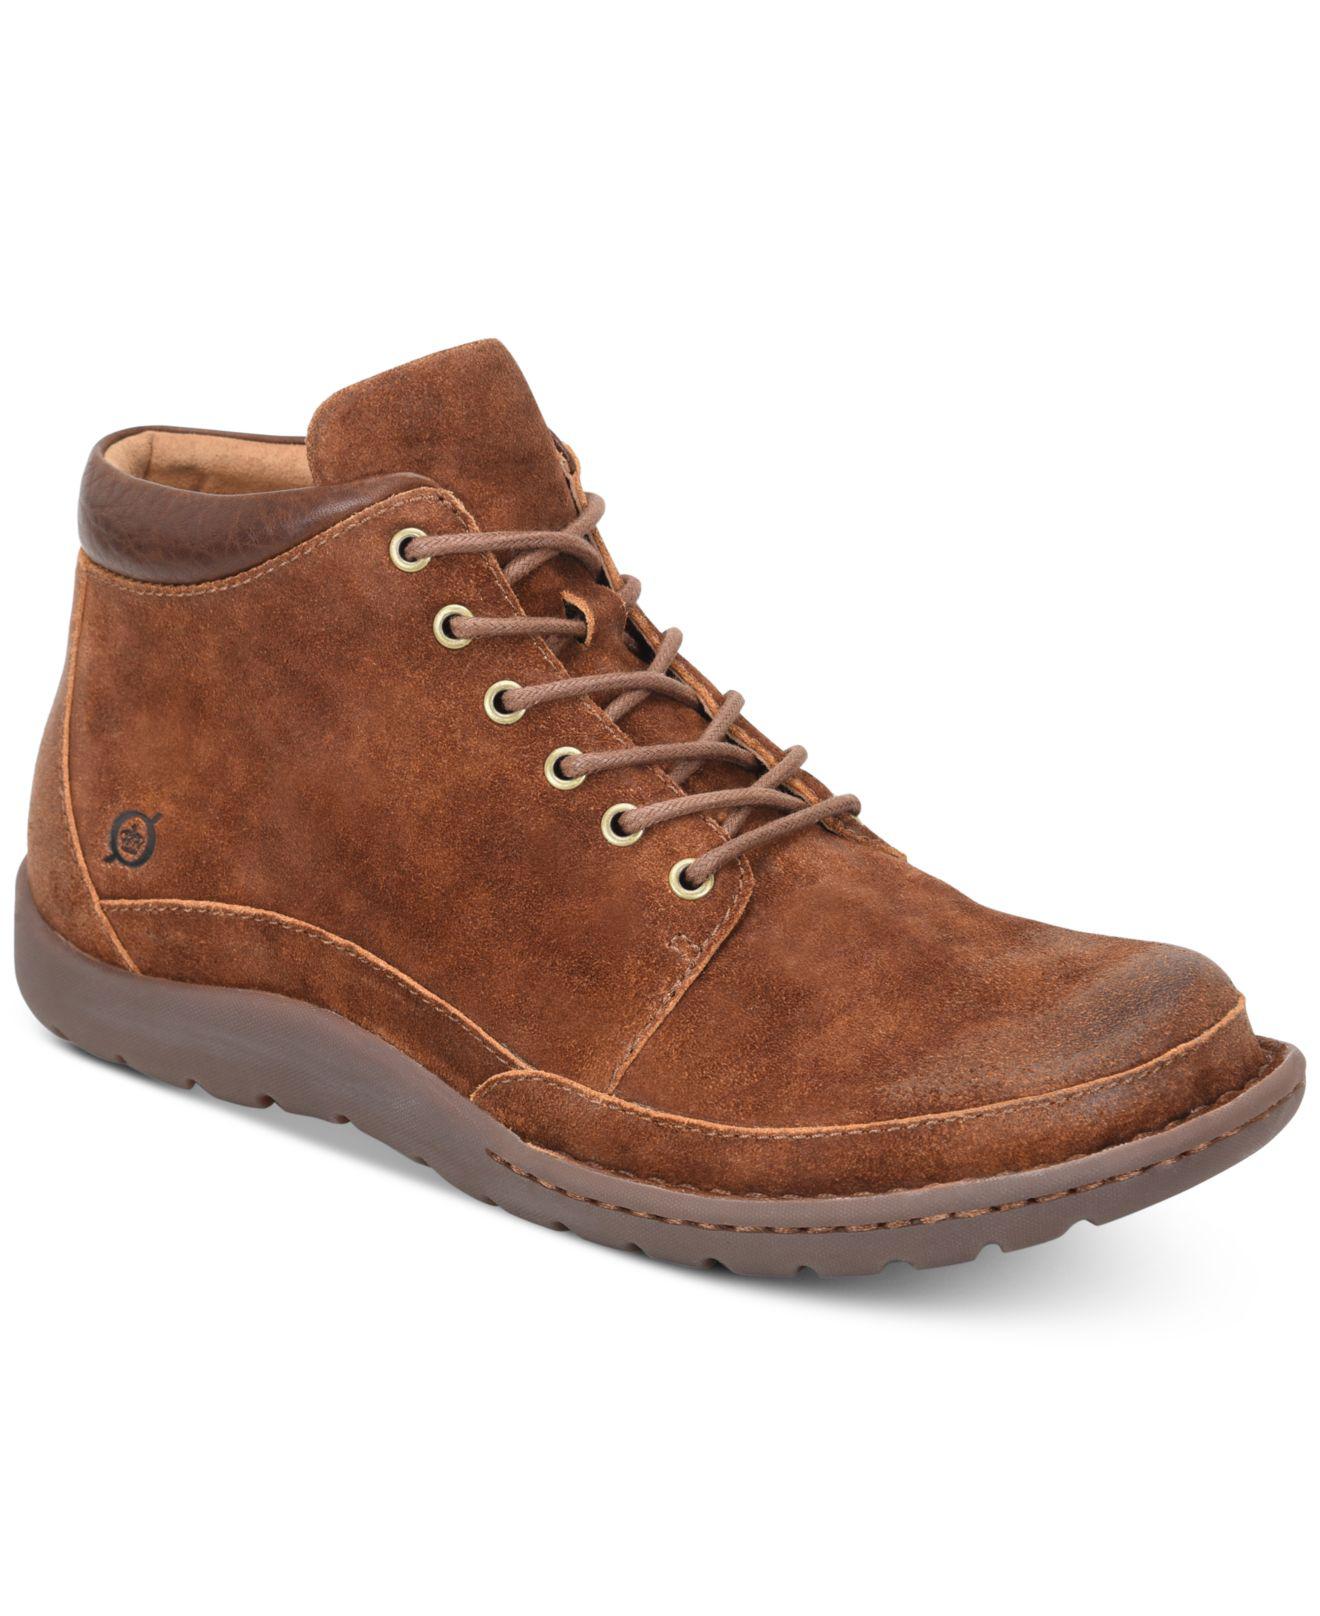 Born Suede Nigel Boots in Rust (Brown) for Men - Save 4% - Lyst